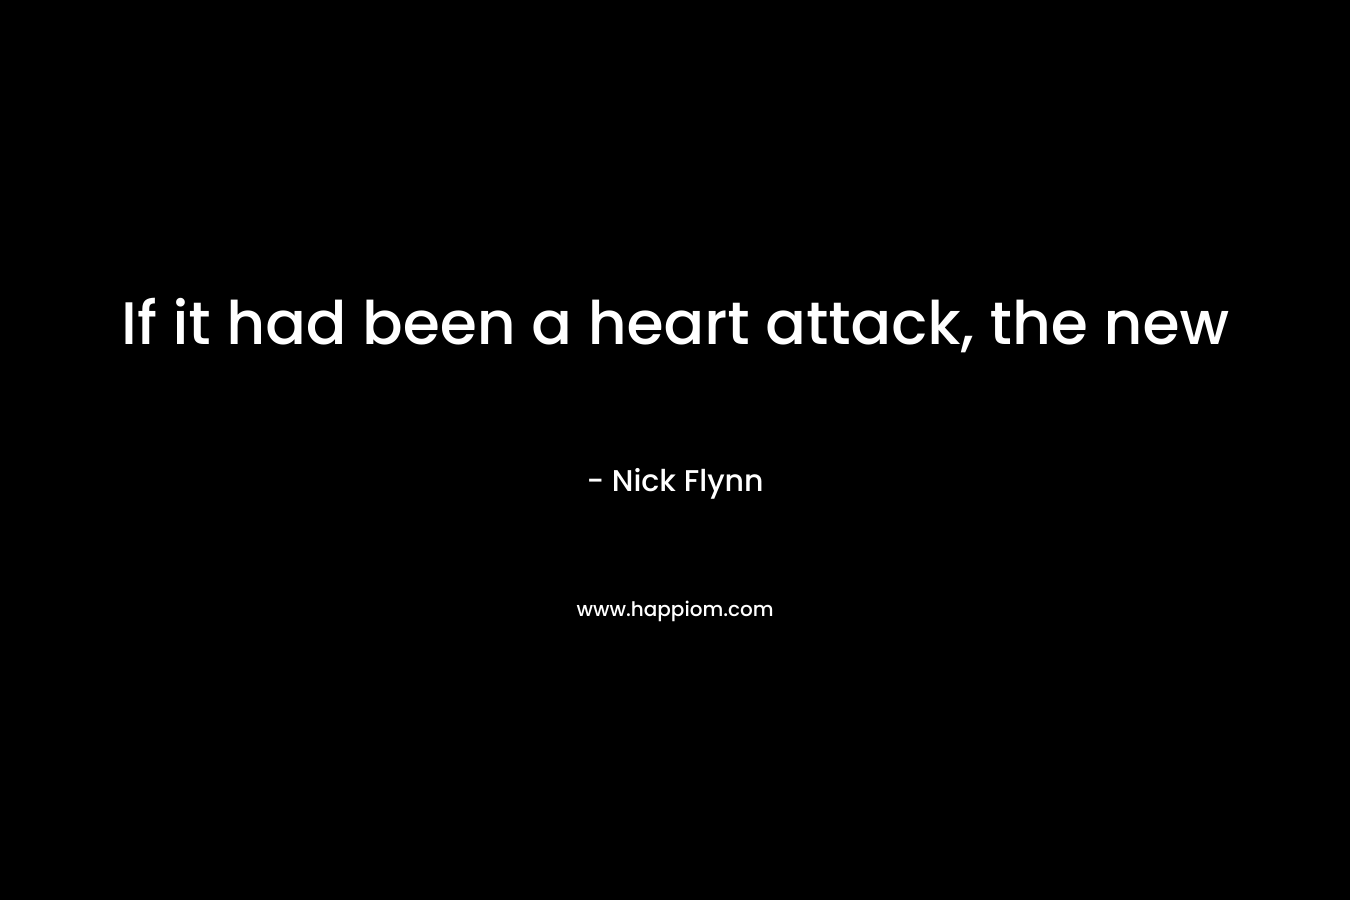 If it had been a heart attack, the new – Nick Flynn